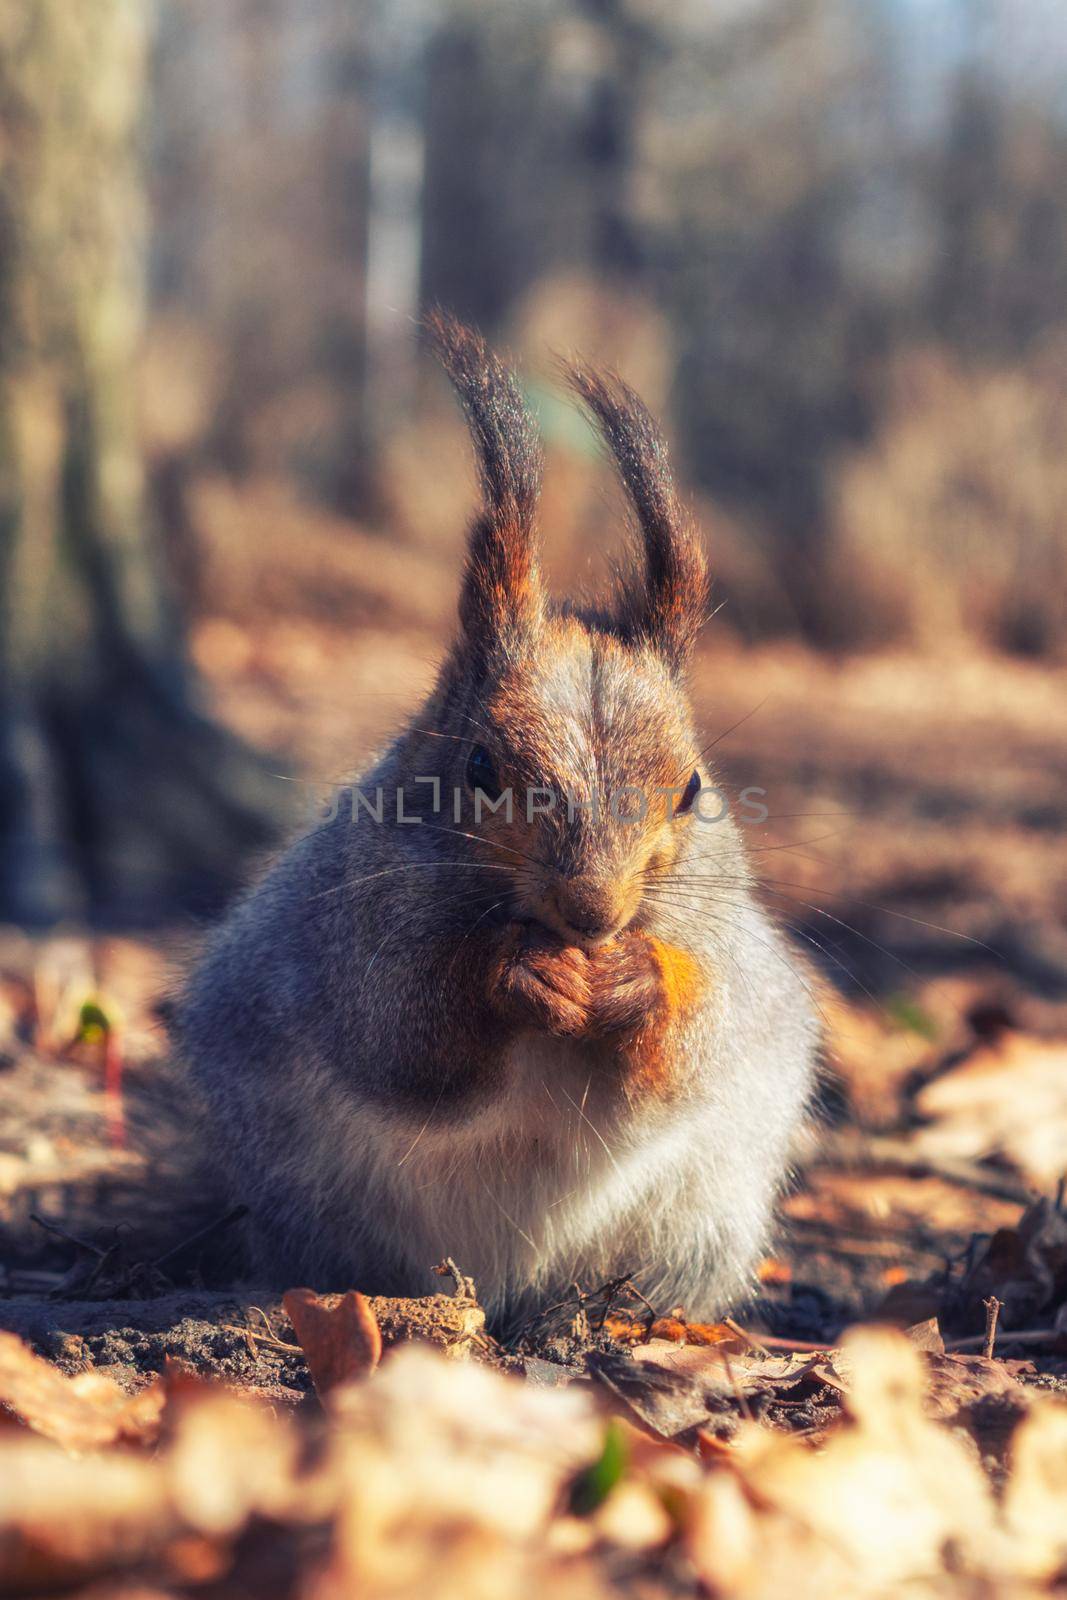 Squirrel in the autumn forest park. Squirrel with nuts in fall foliage. by Andre1ns